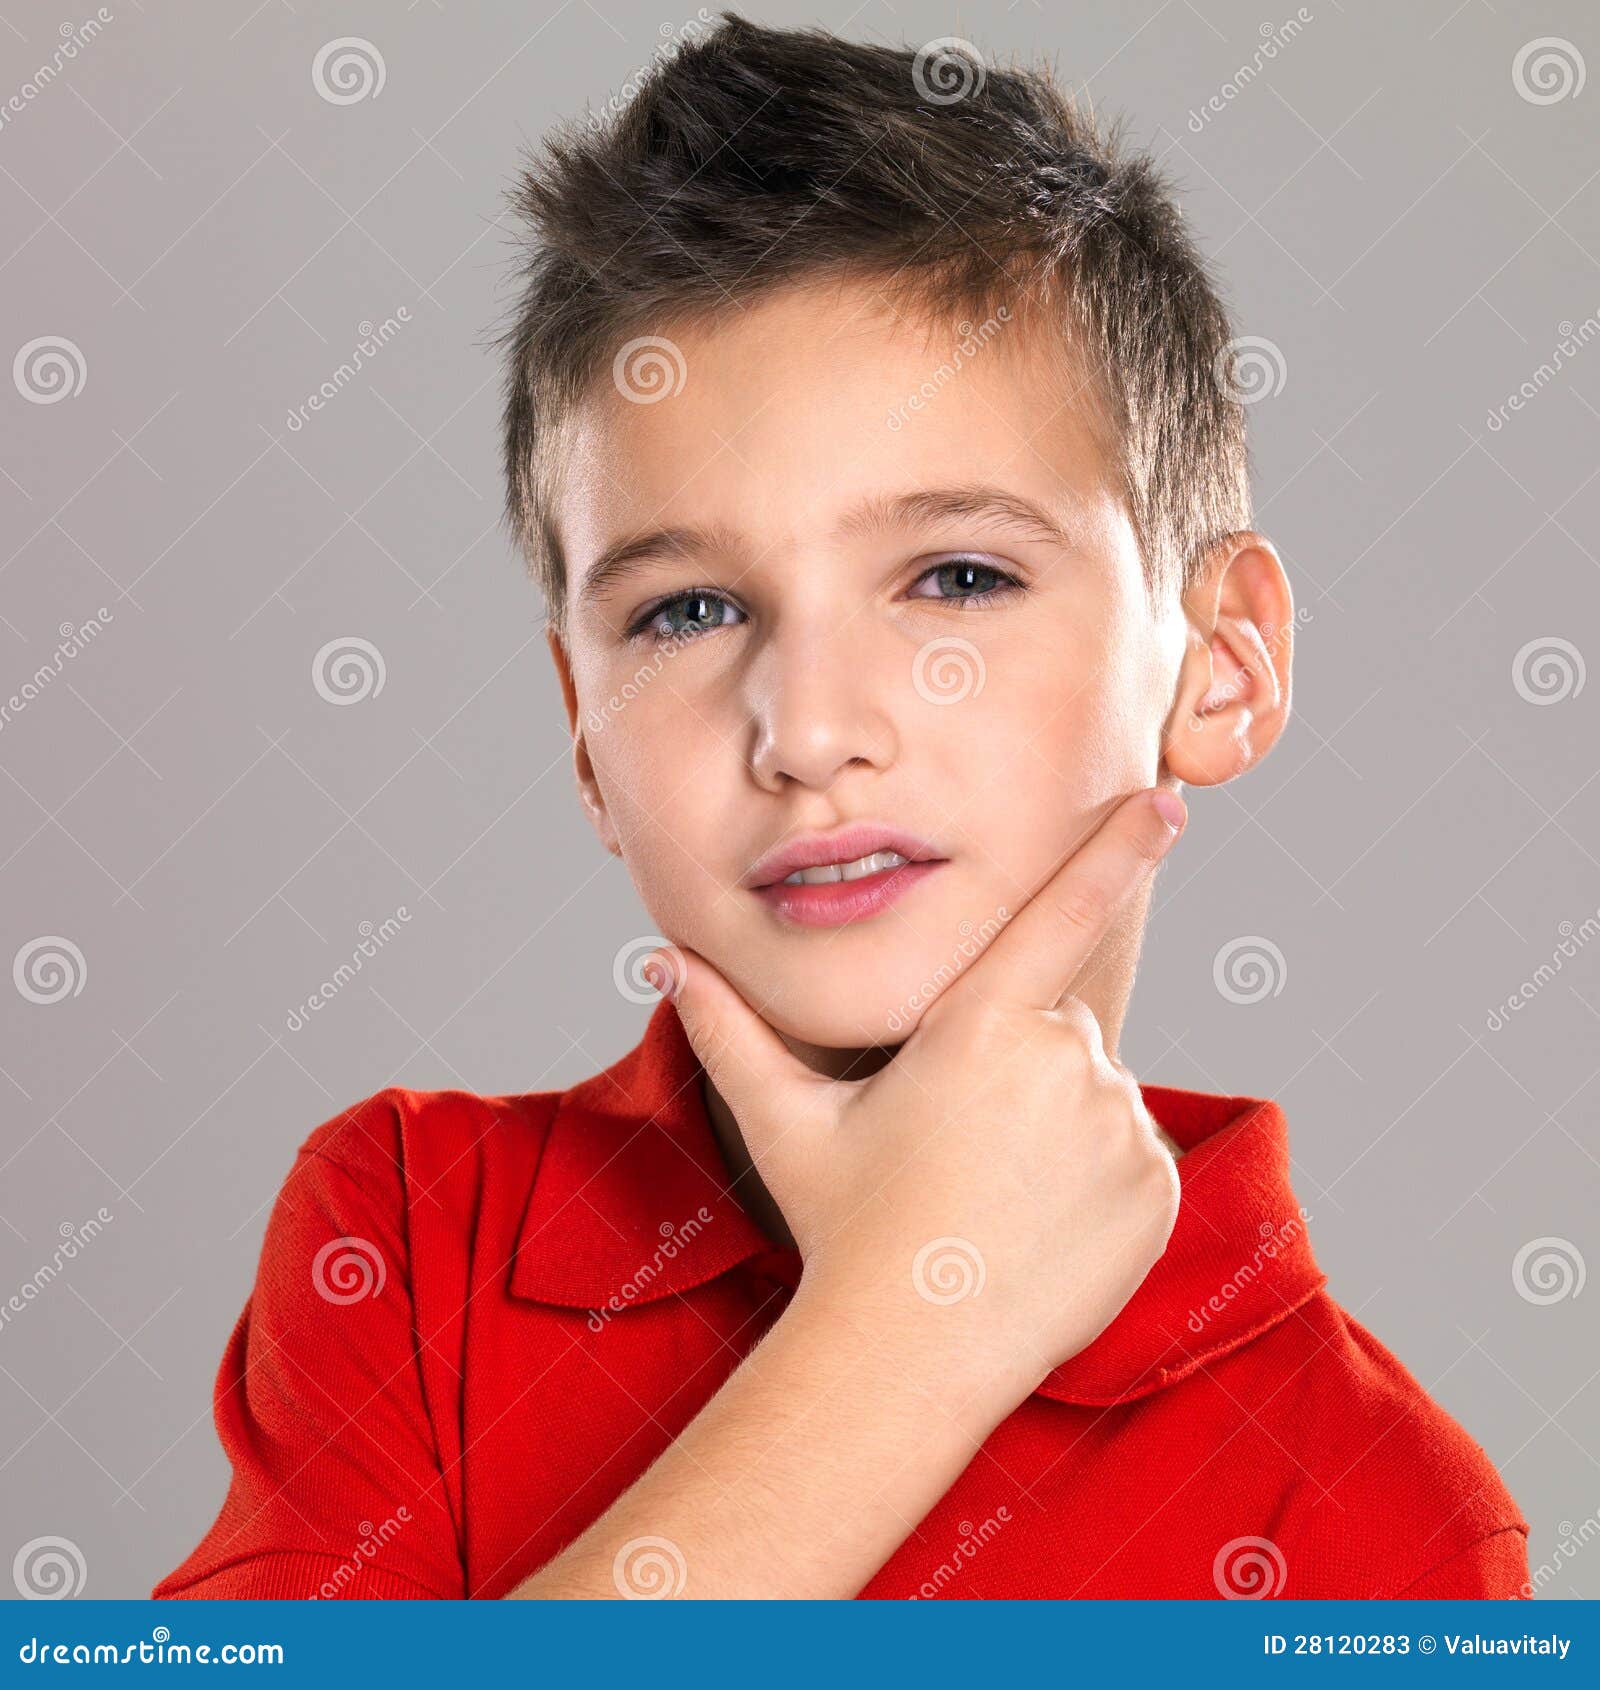 Portrait of adorable young beautiful boy - portrait-adorable-young-beautiful-boy-28120283